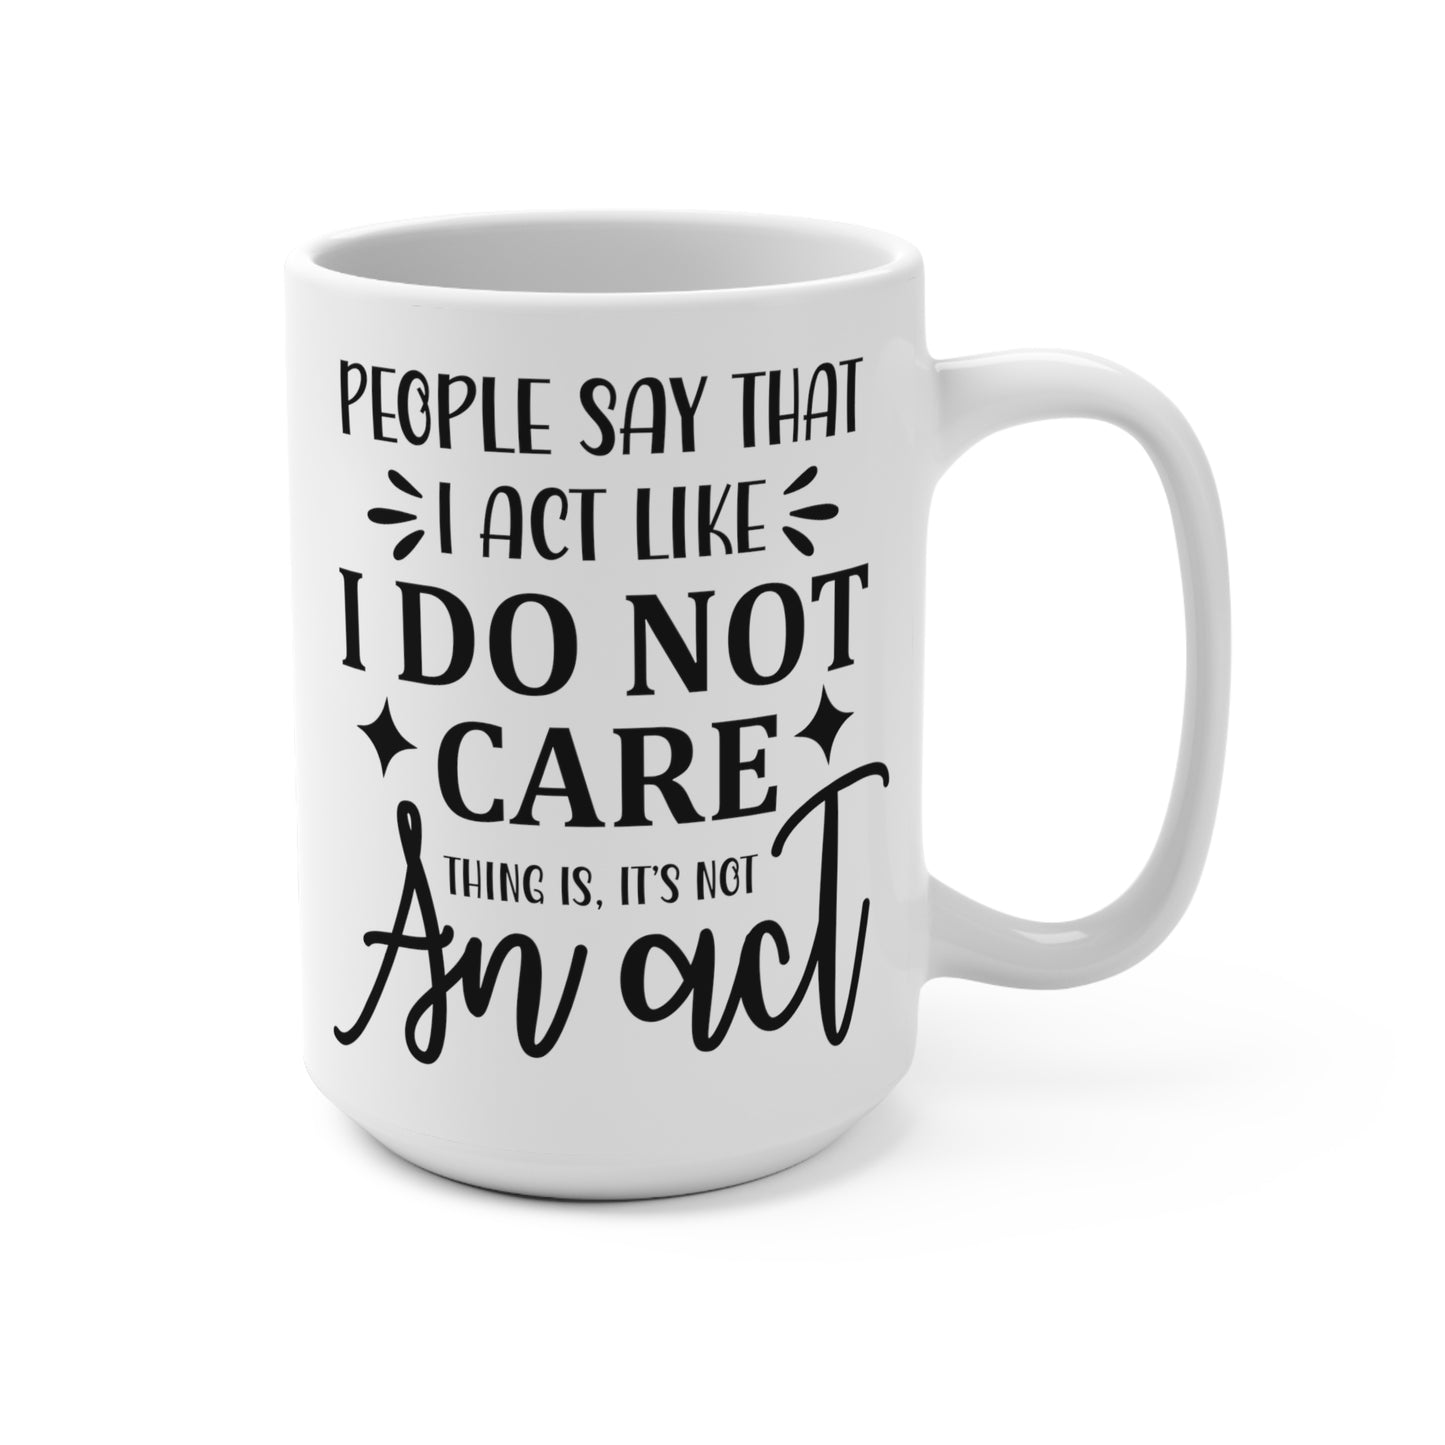 Inspirational Quote Mug - People Say I Act Like I Do Not Care - Motivational Coffee Cup - Unique Gift Idea - Black and White, Sarcastic Drinkware